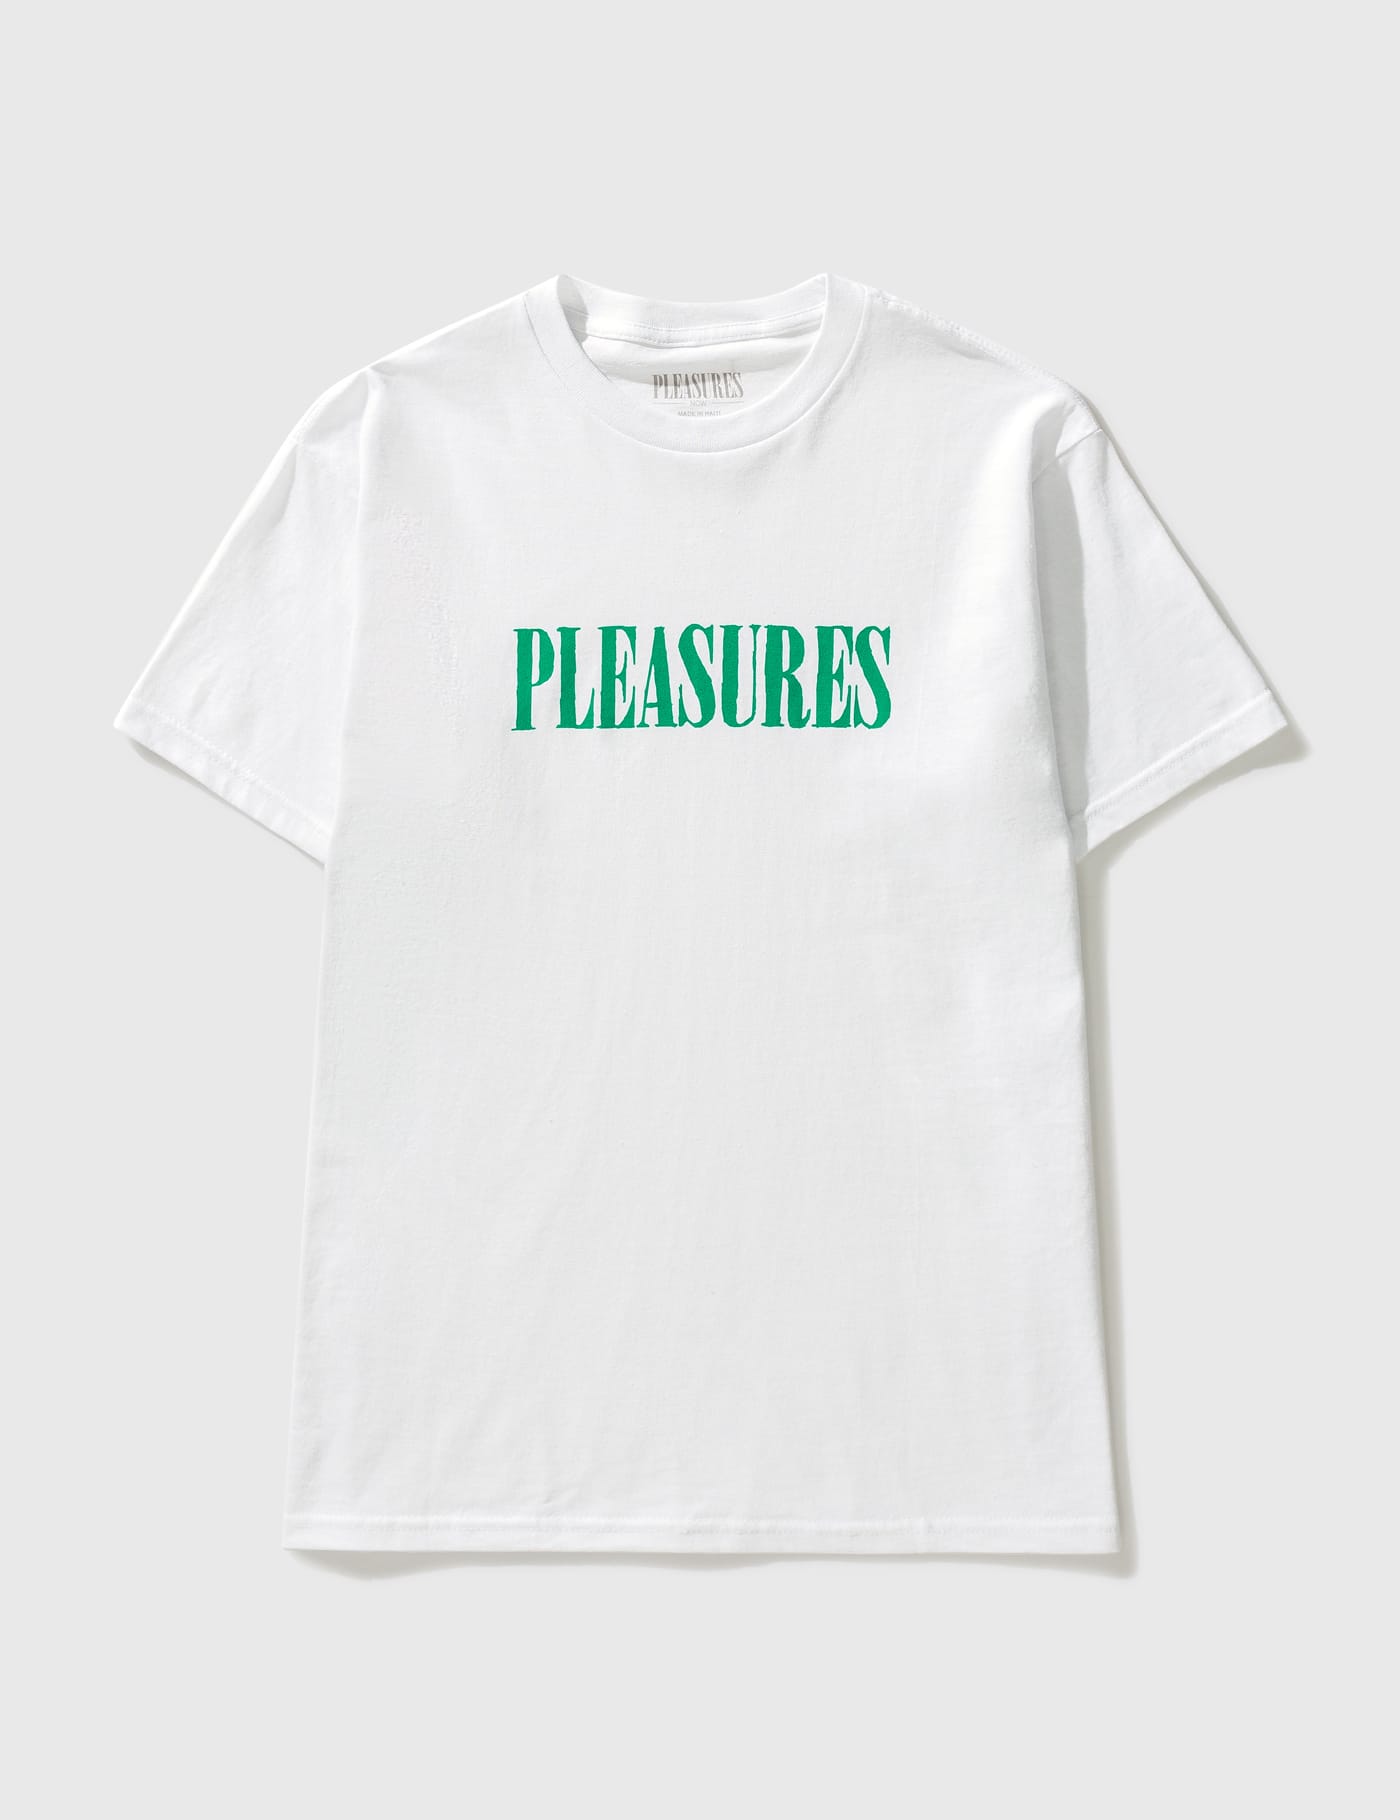 Pleasures | HBX - Globally Curated Fashion and Lifestyle by Hypebeast